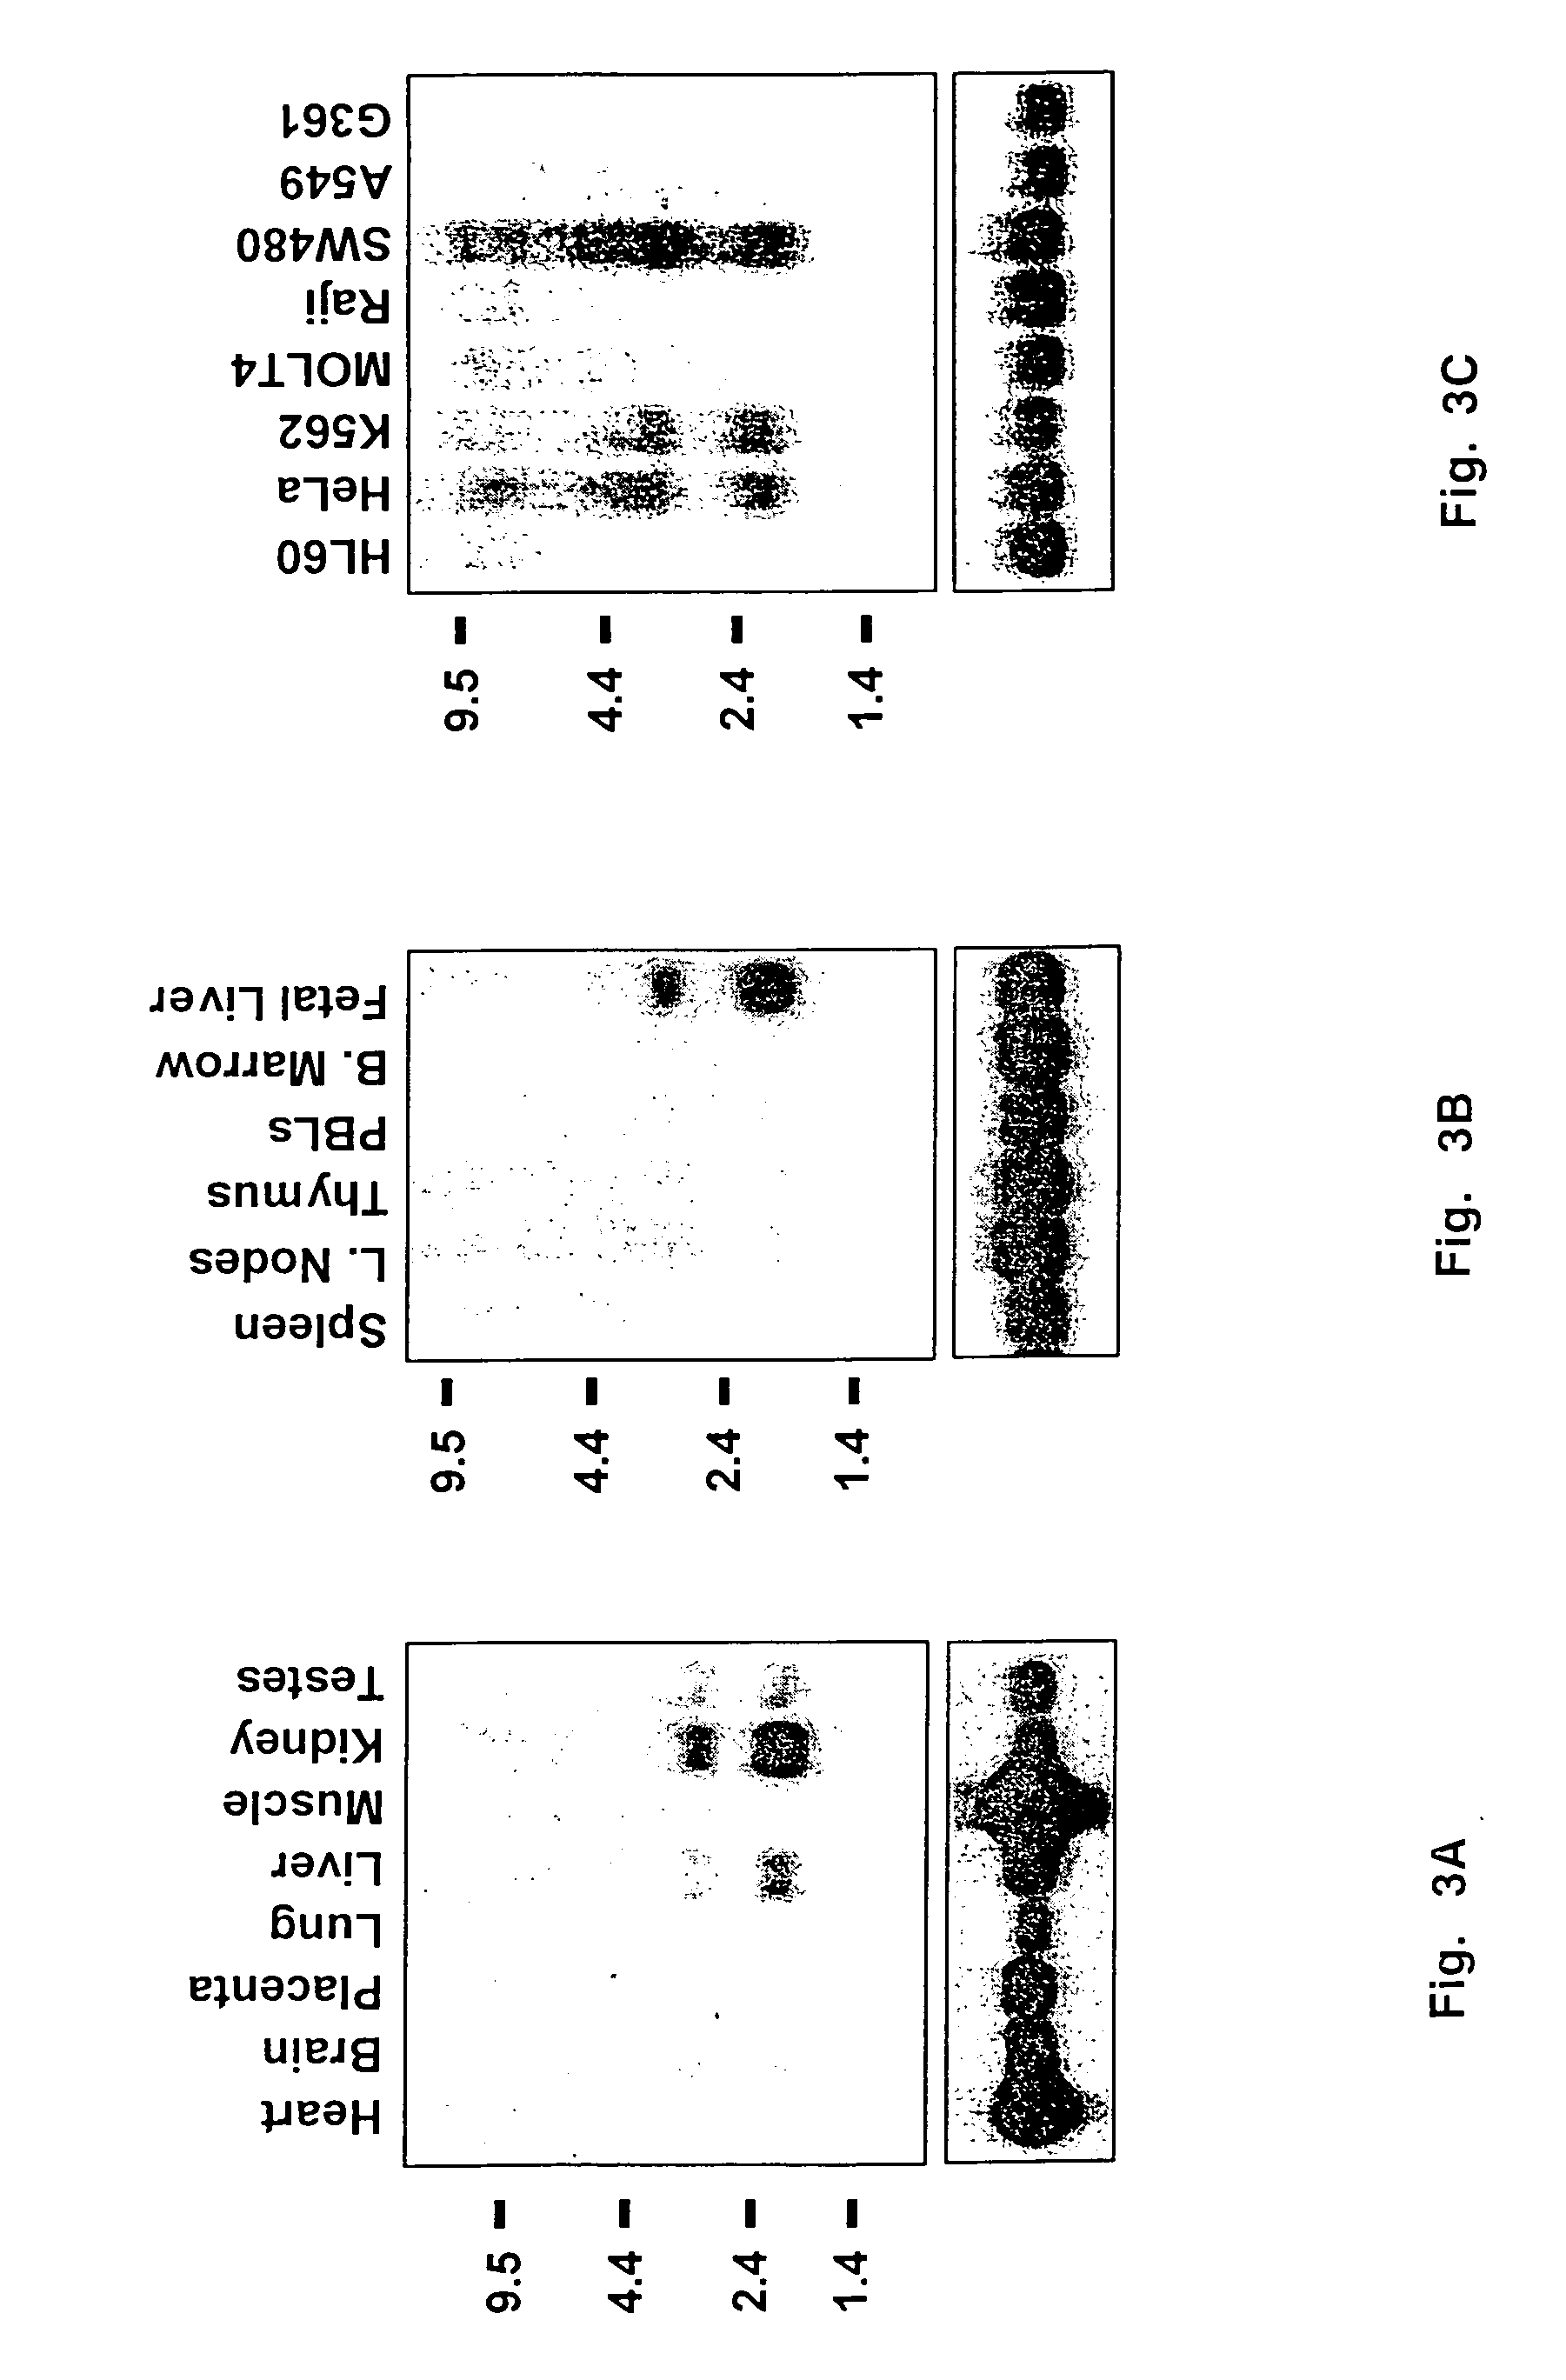 EV127 gene sequences and protein encoded thereby